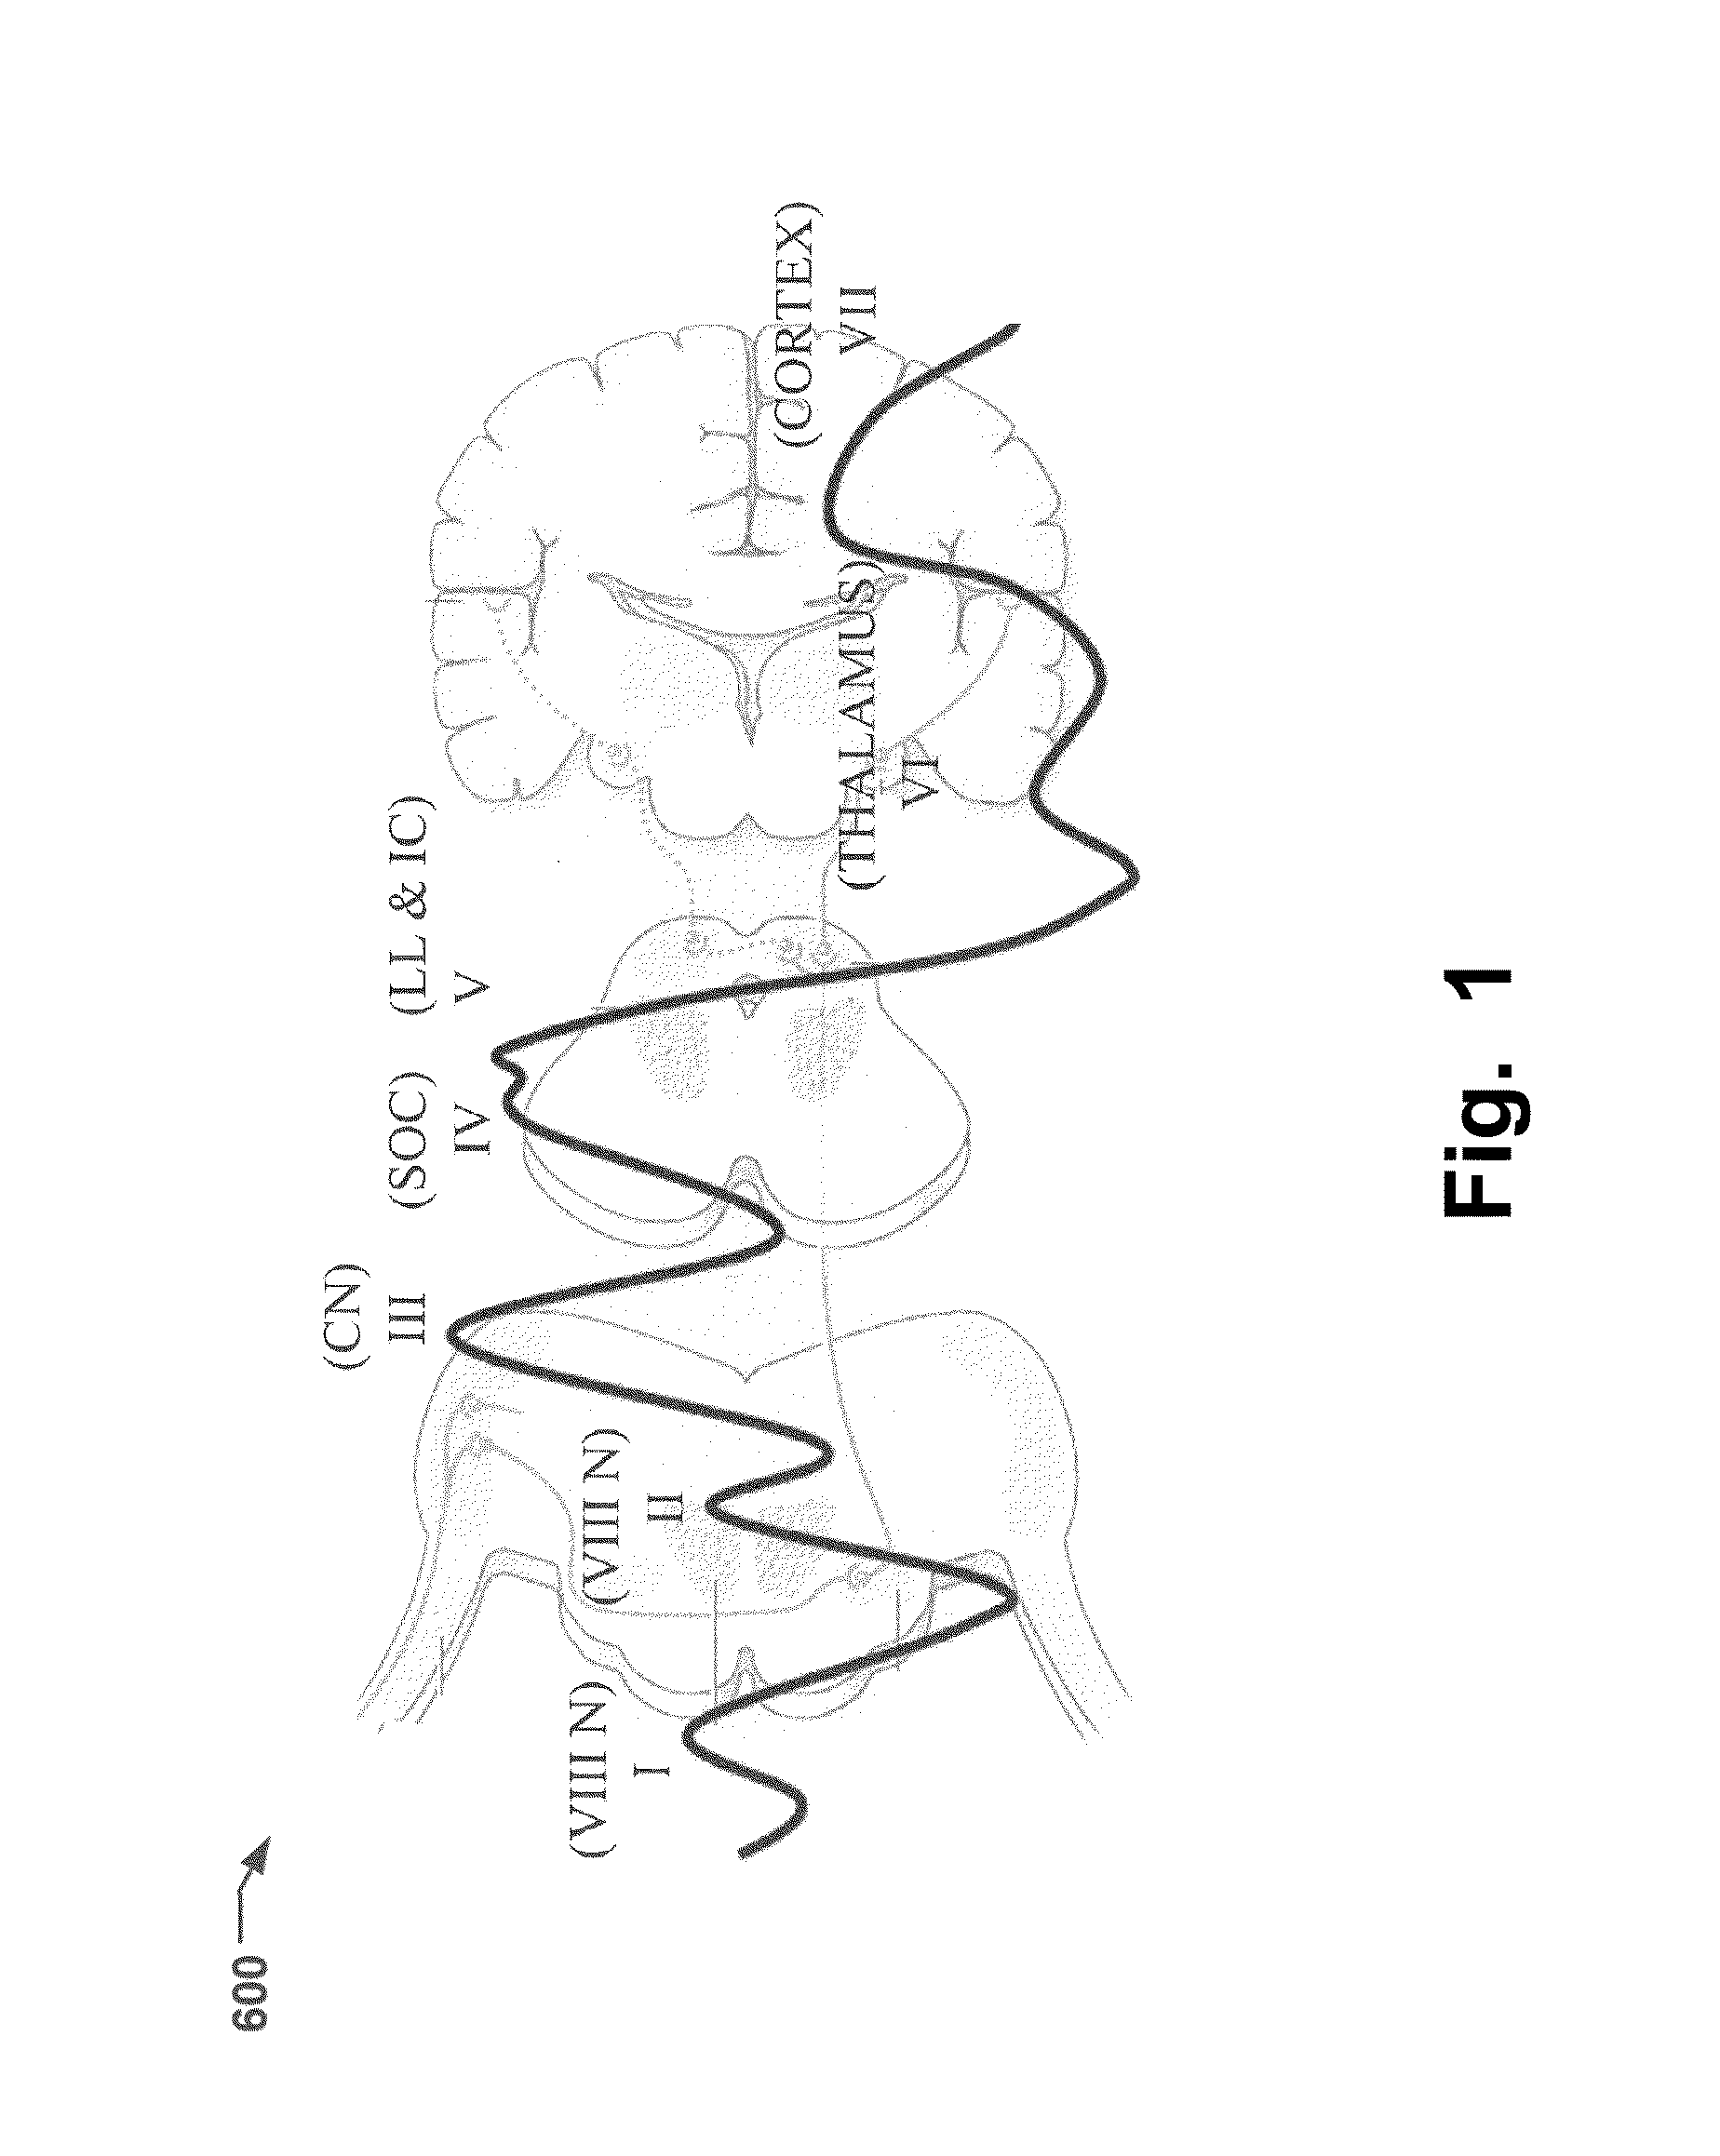 Method And System For Monitoring Depth Of Anaesthesia And Sensory Functioning